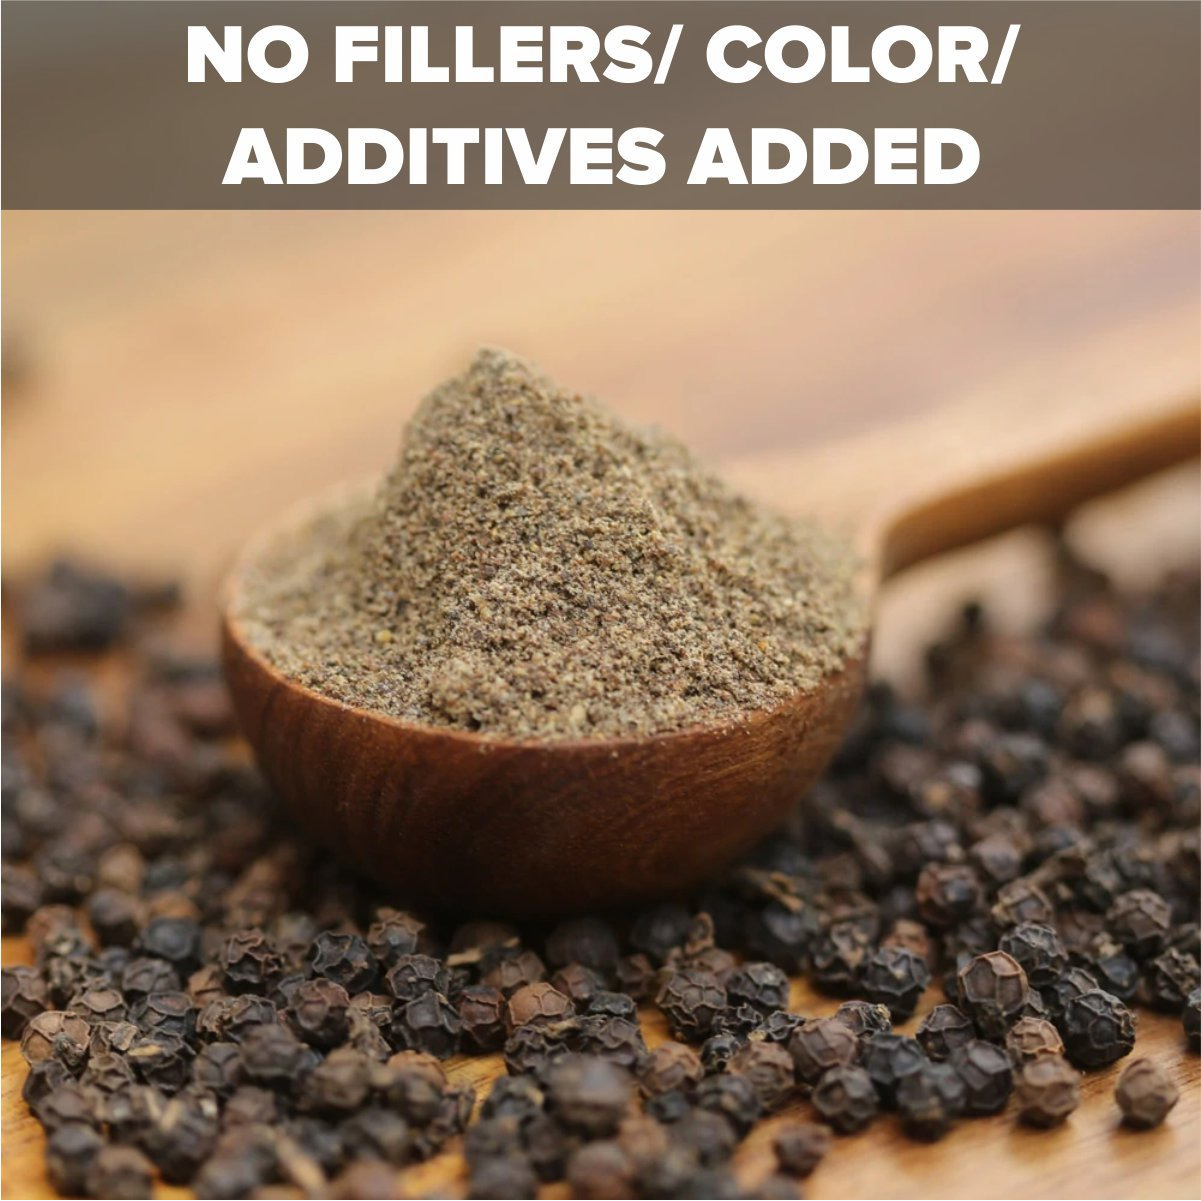 EL The Cook Black Peppercorns Powder | Aromatic Indian Spice Pepper | Natural, Vegan, Gluten Free, NON-GMO, Resealable Bag | Ideal for Cooking, Seasoning & Grinder/Pepper Mill Refill | 1.7oz (50gm) (Flavor: Black Pepper)